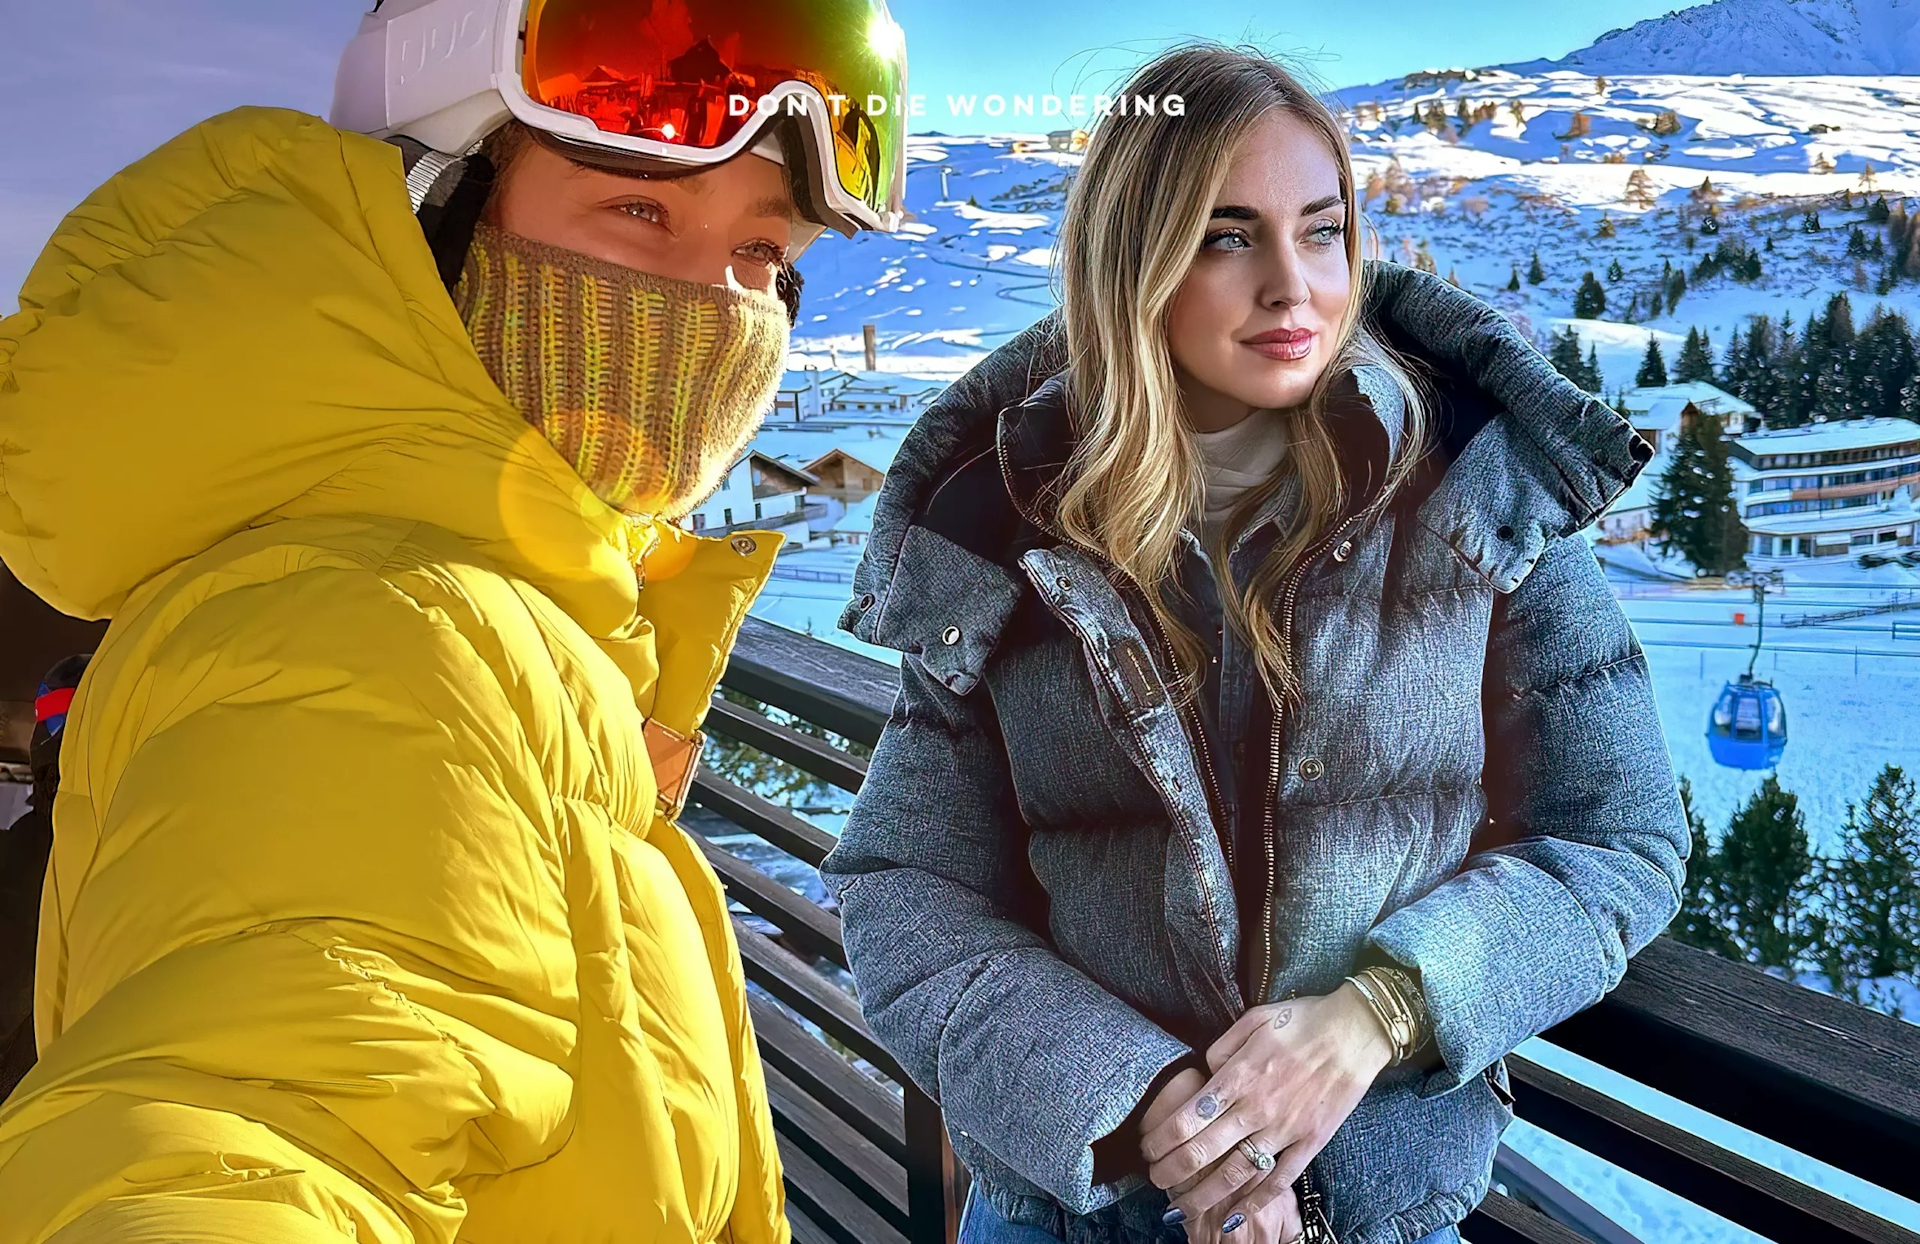 Here’s Where Celebrities are Skiing this Year